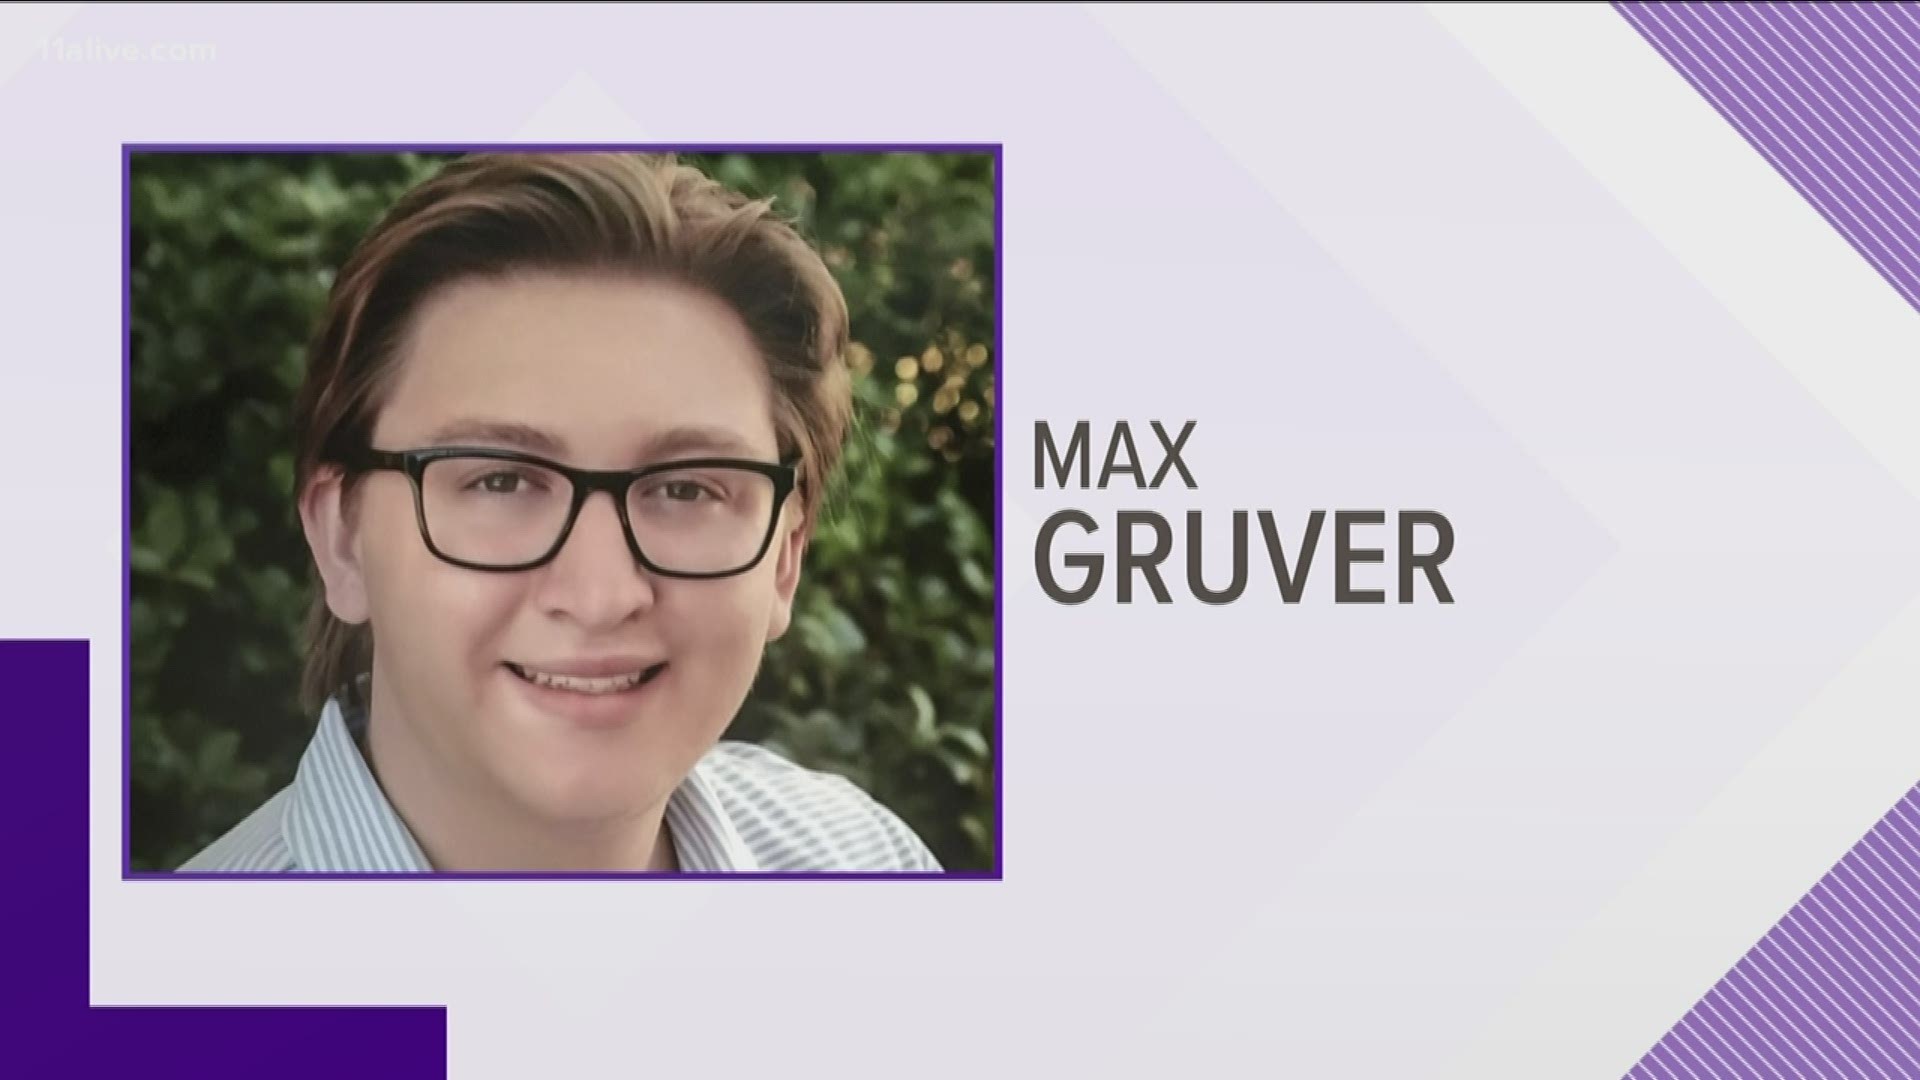 Max Gruver was 18 when he  died.